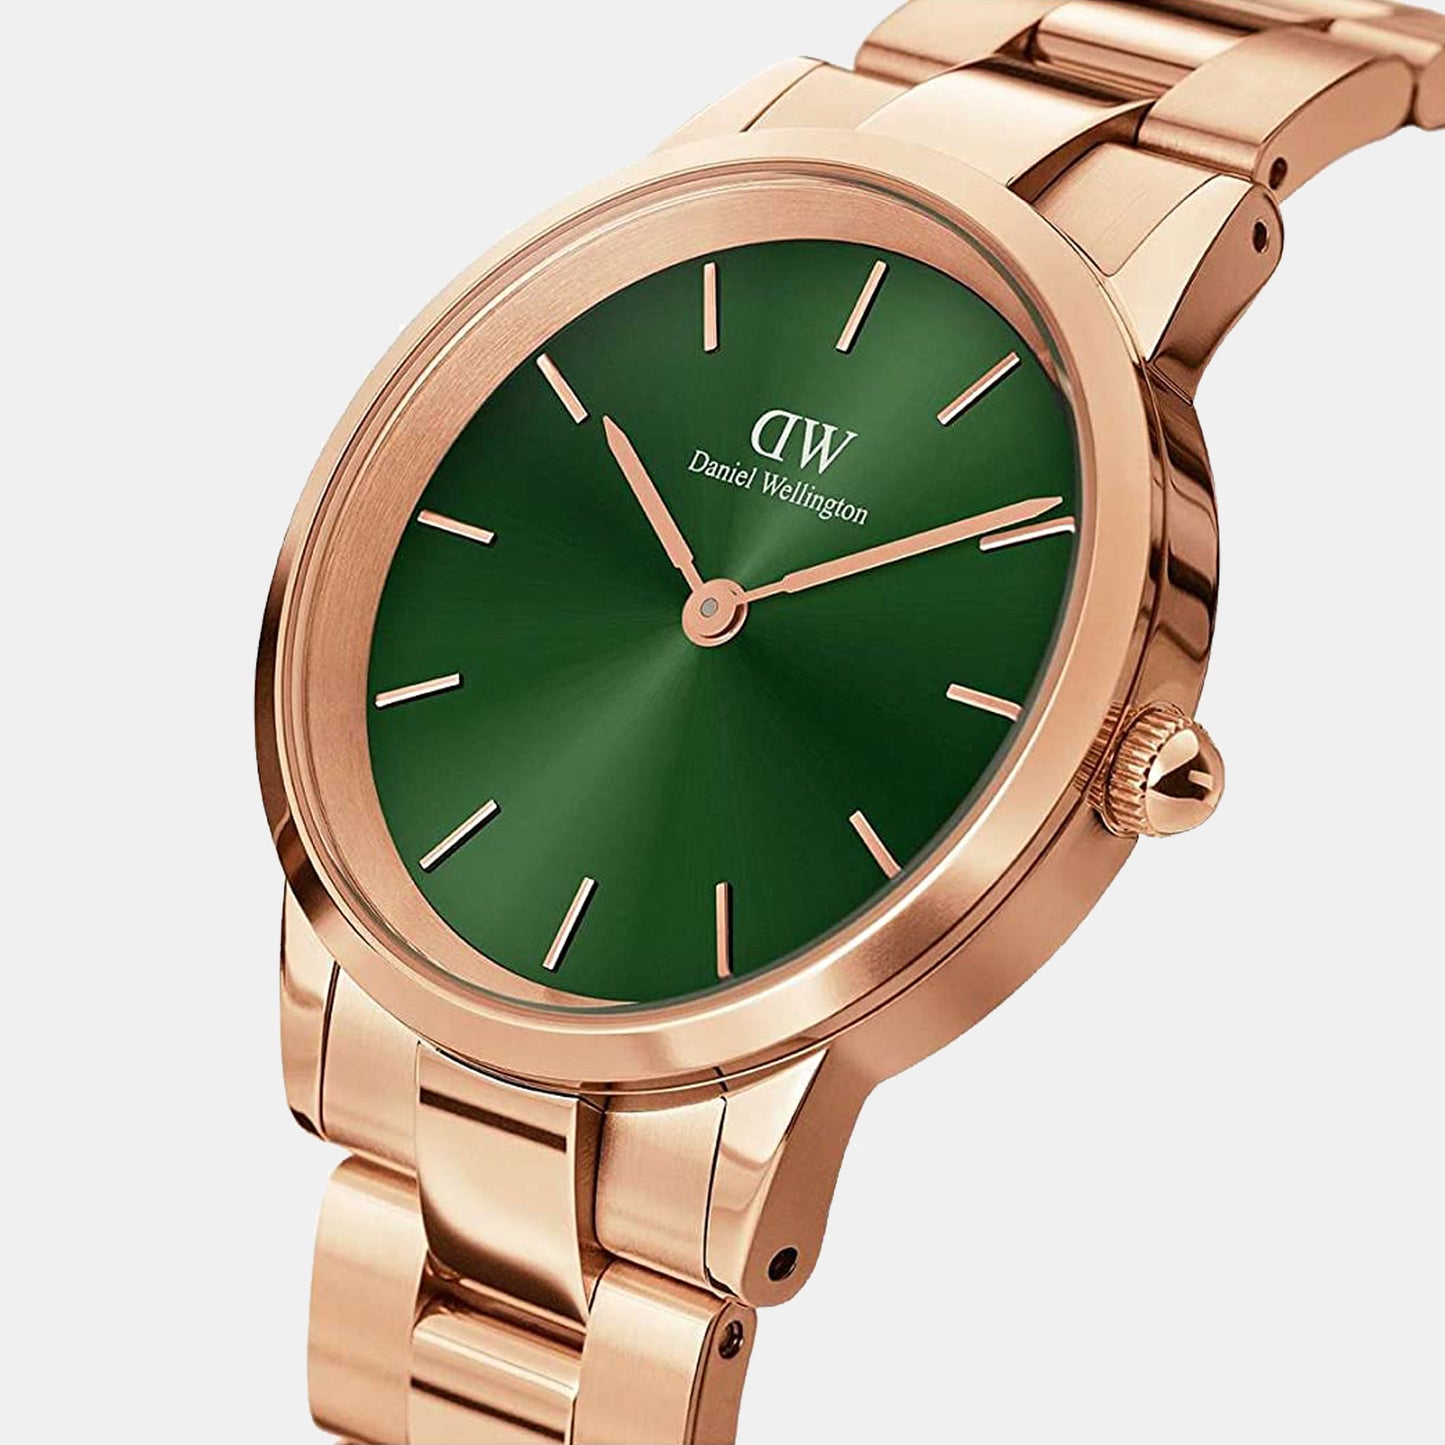 Iconic Female Green Analog Stainless Steel Watch DW00100420